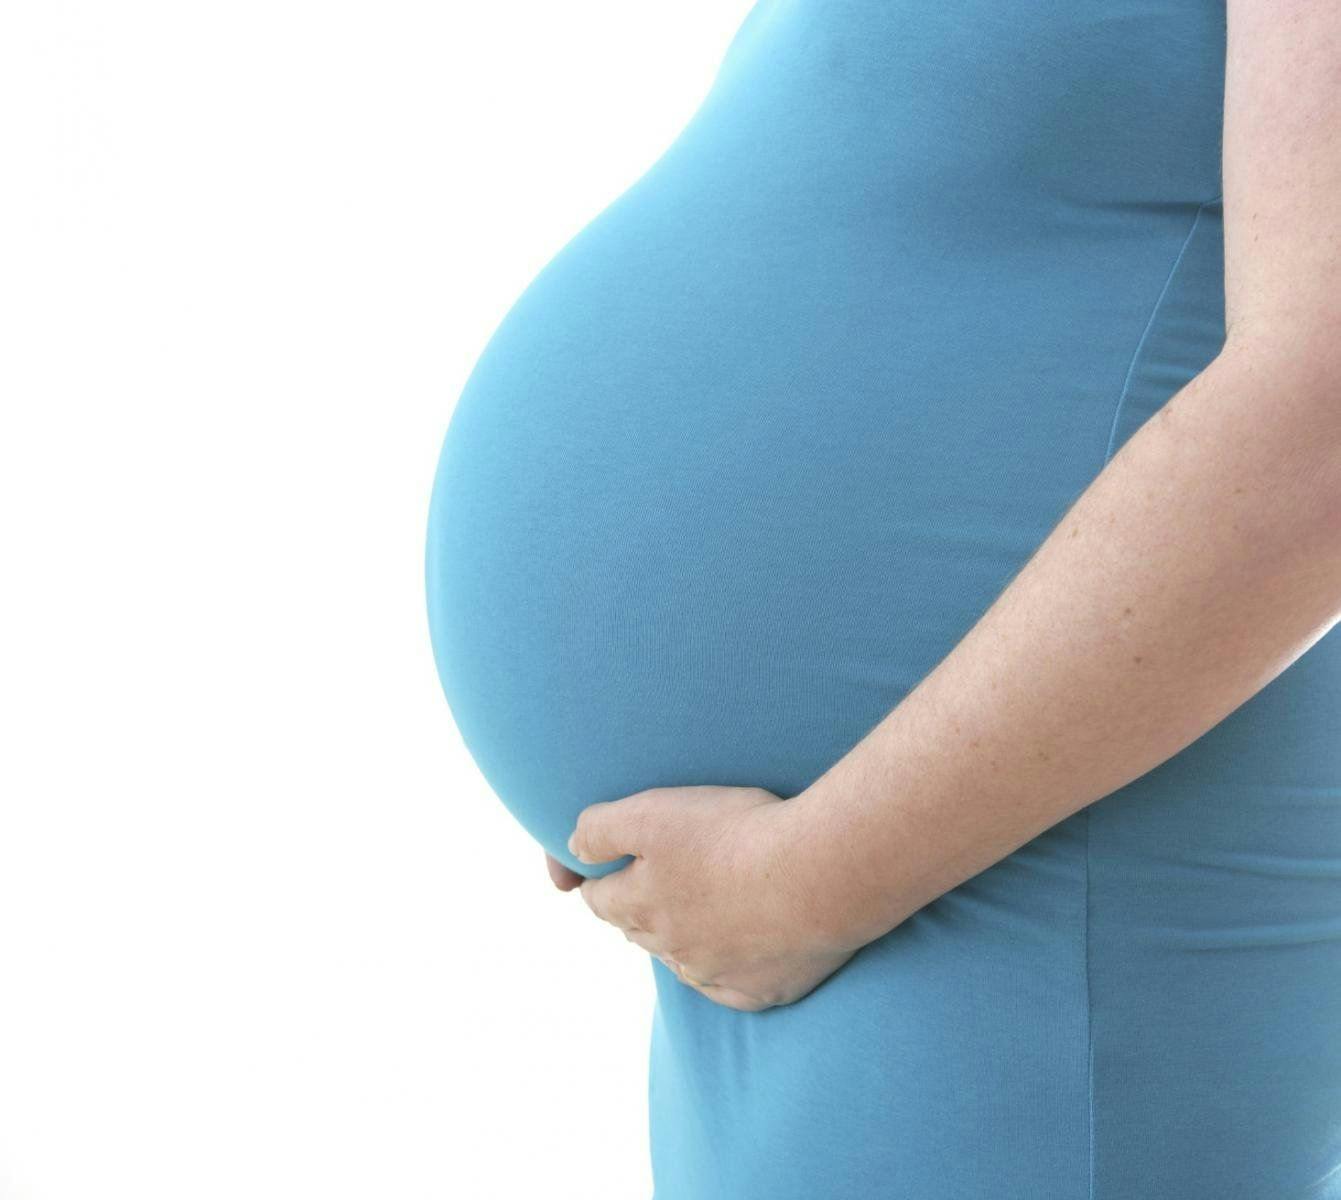 New Omega-3 Prenatal Ingredient Has Same Ratio of EPA to DHA as Mother’s Milk